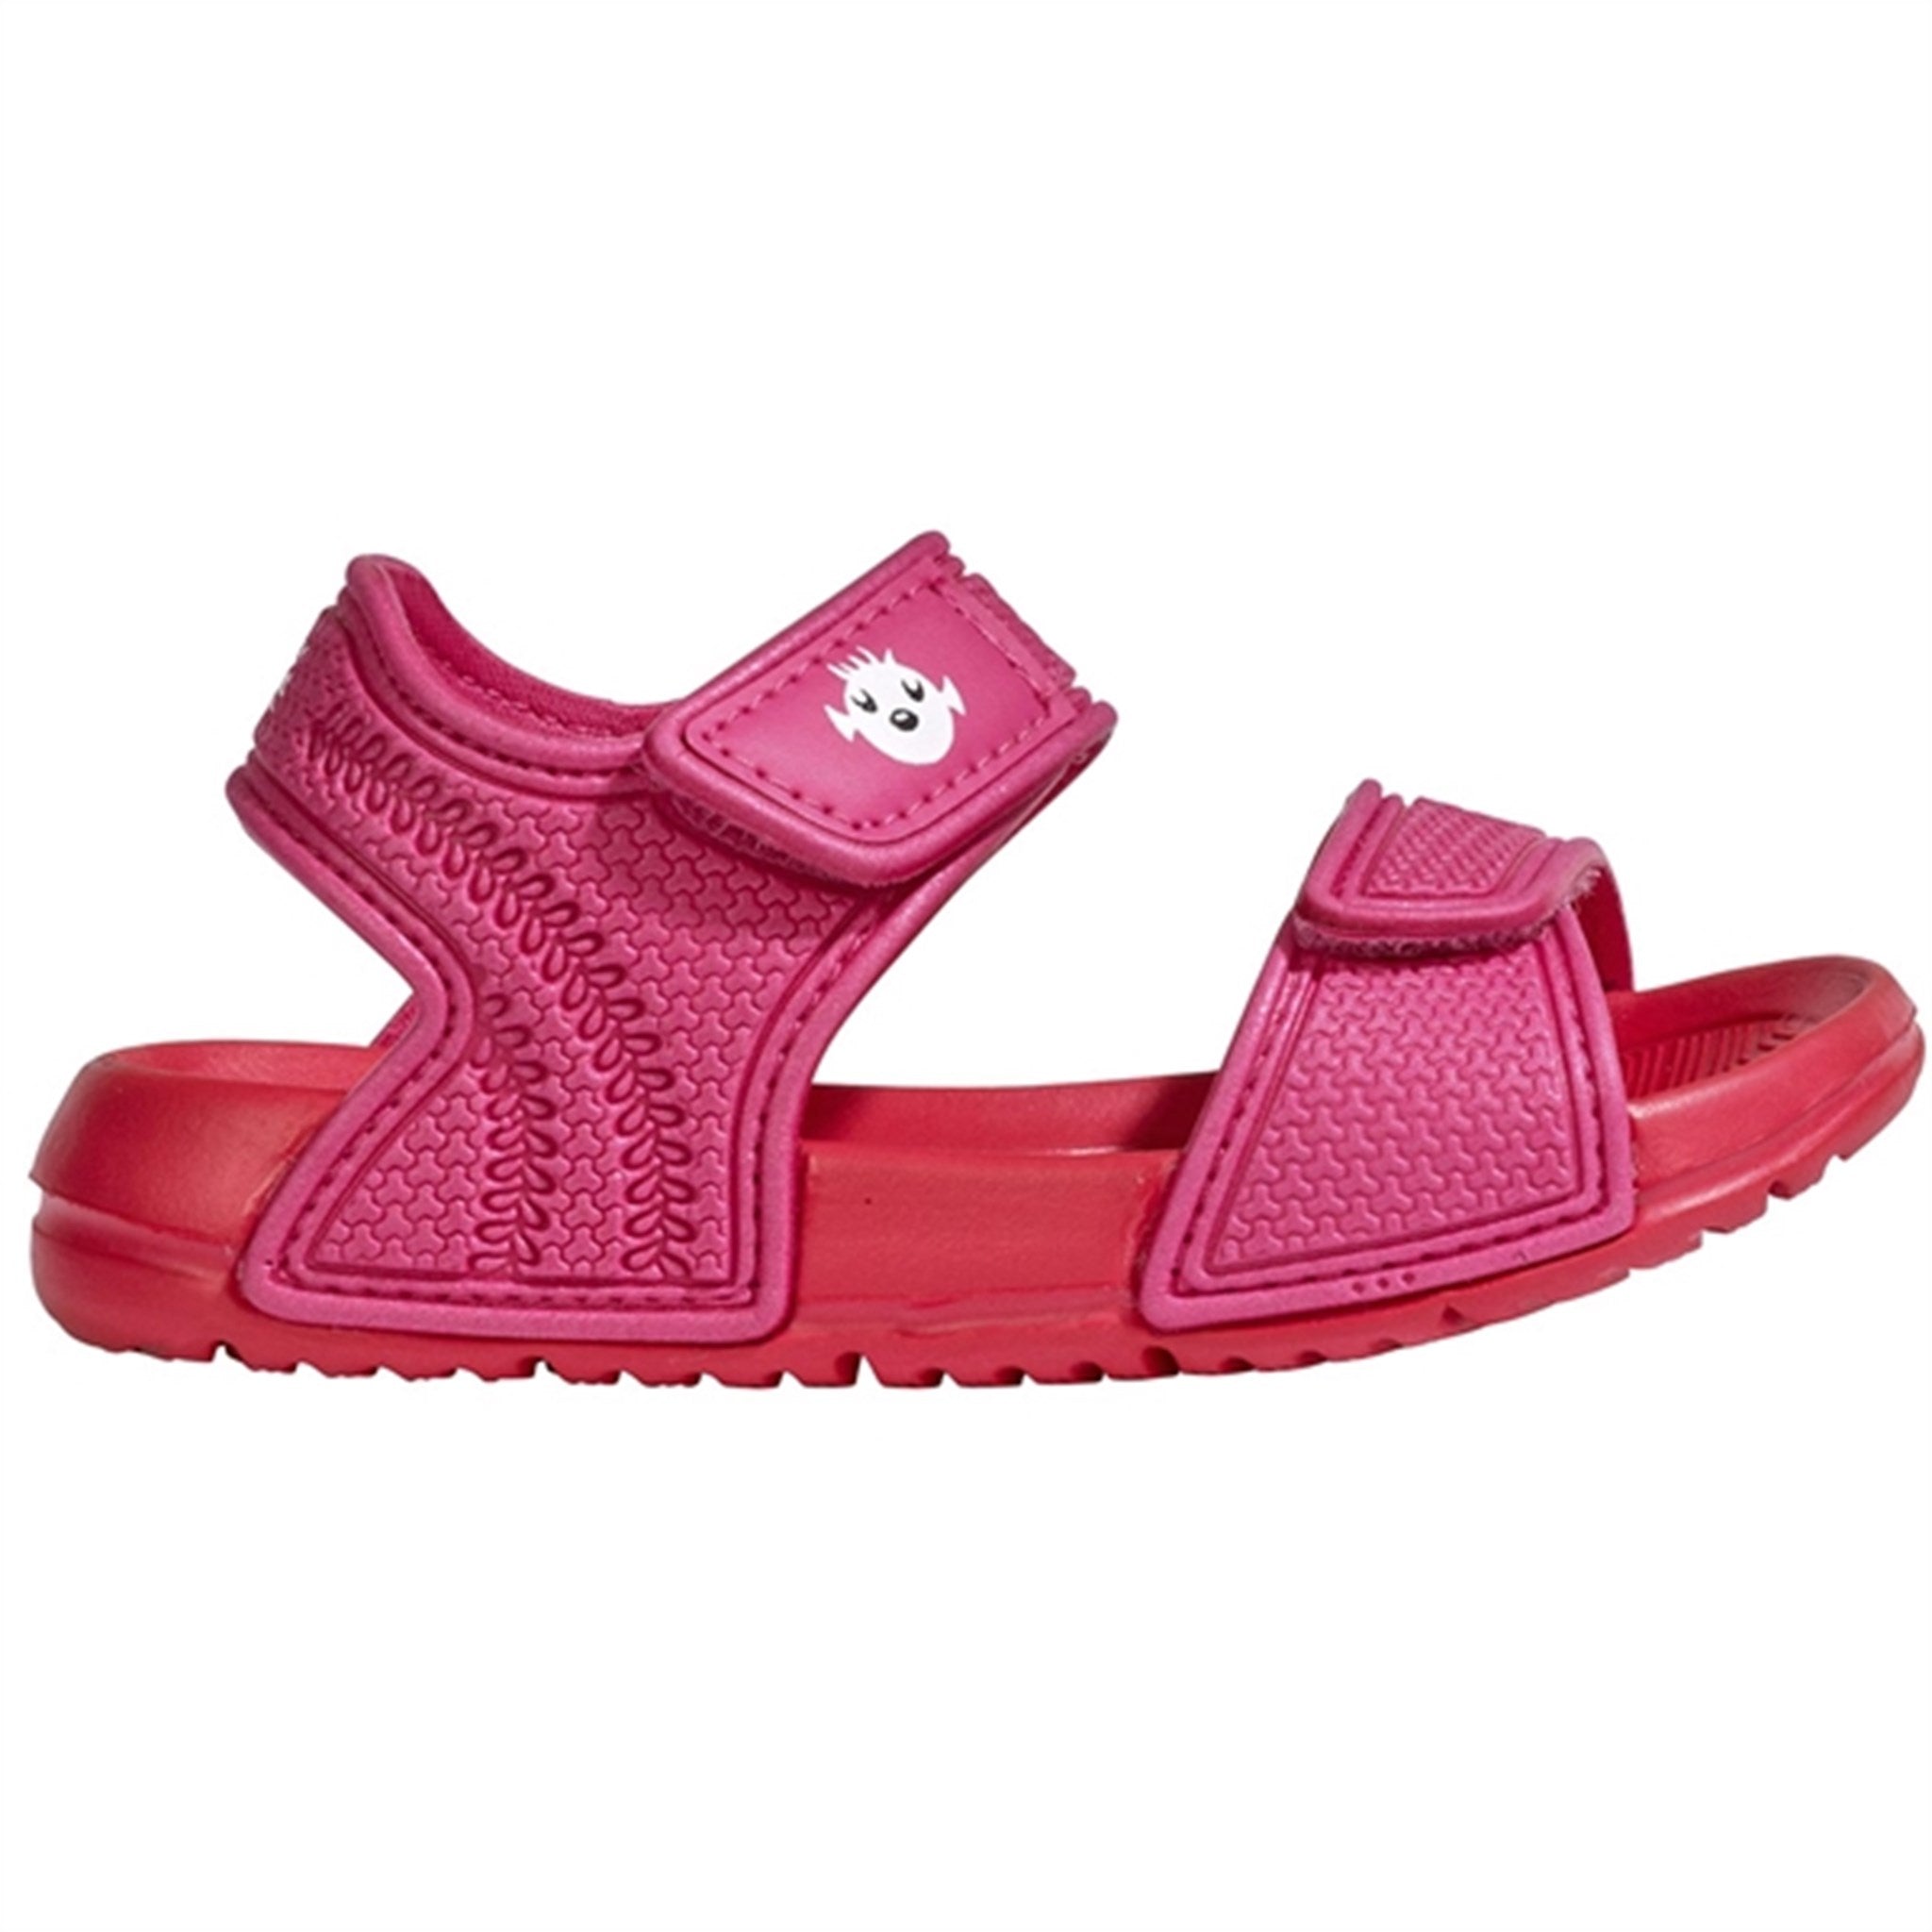 BECO Swim Shoes Pink 2